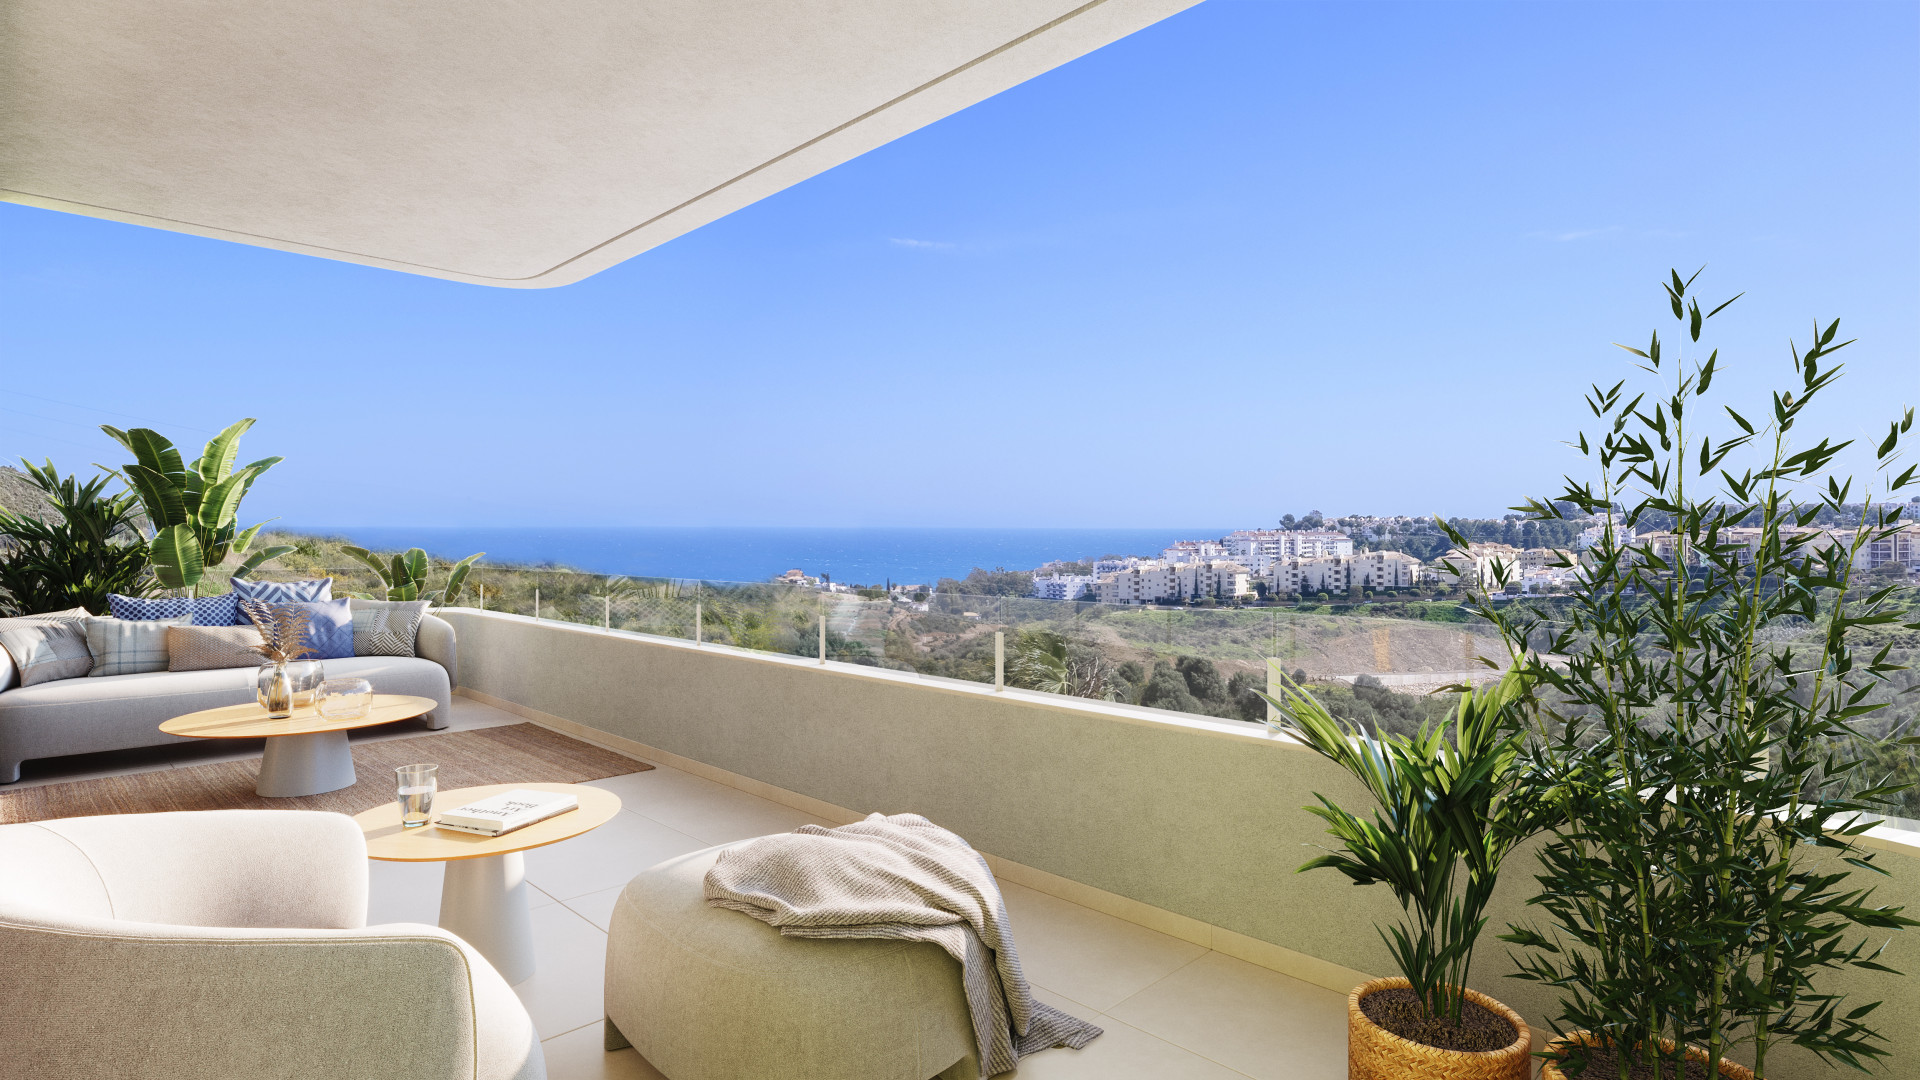 New modern apartments and penthouses for sale in Calanova - Mijas Costa